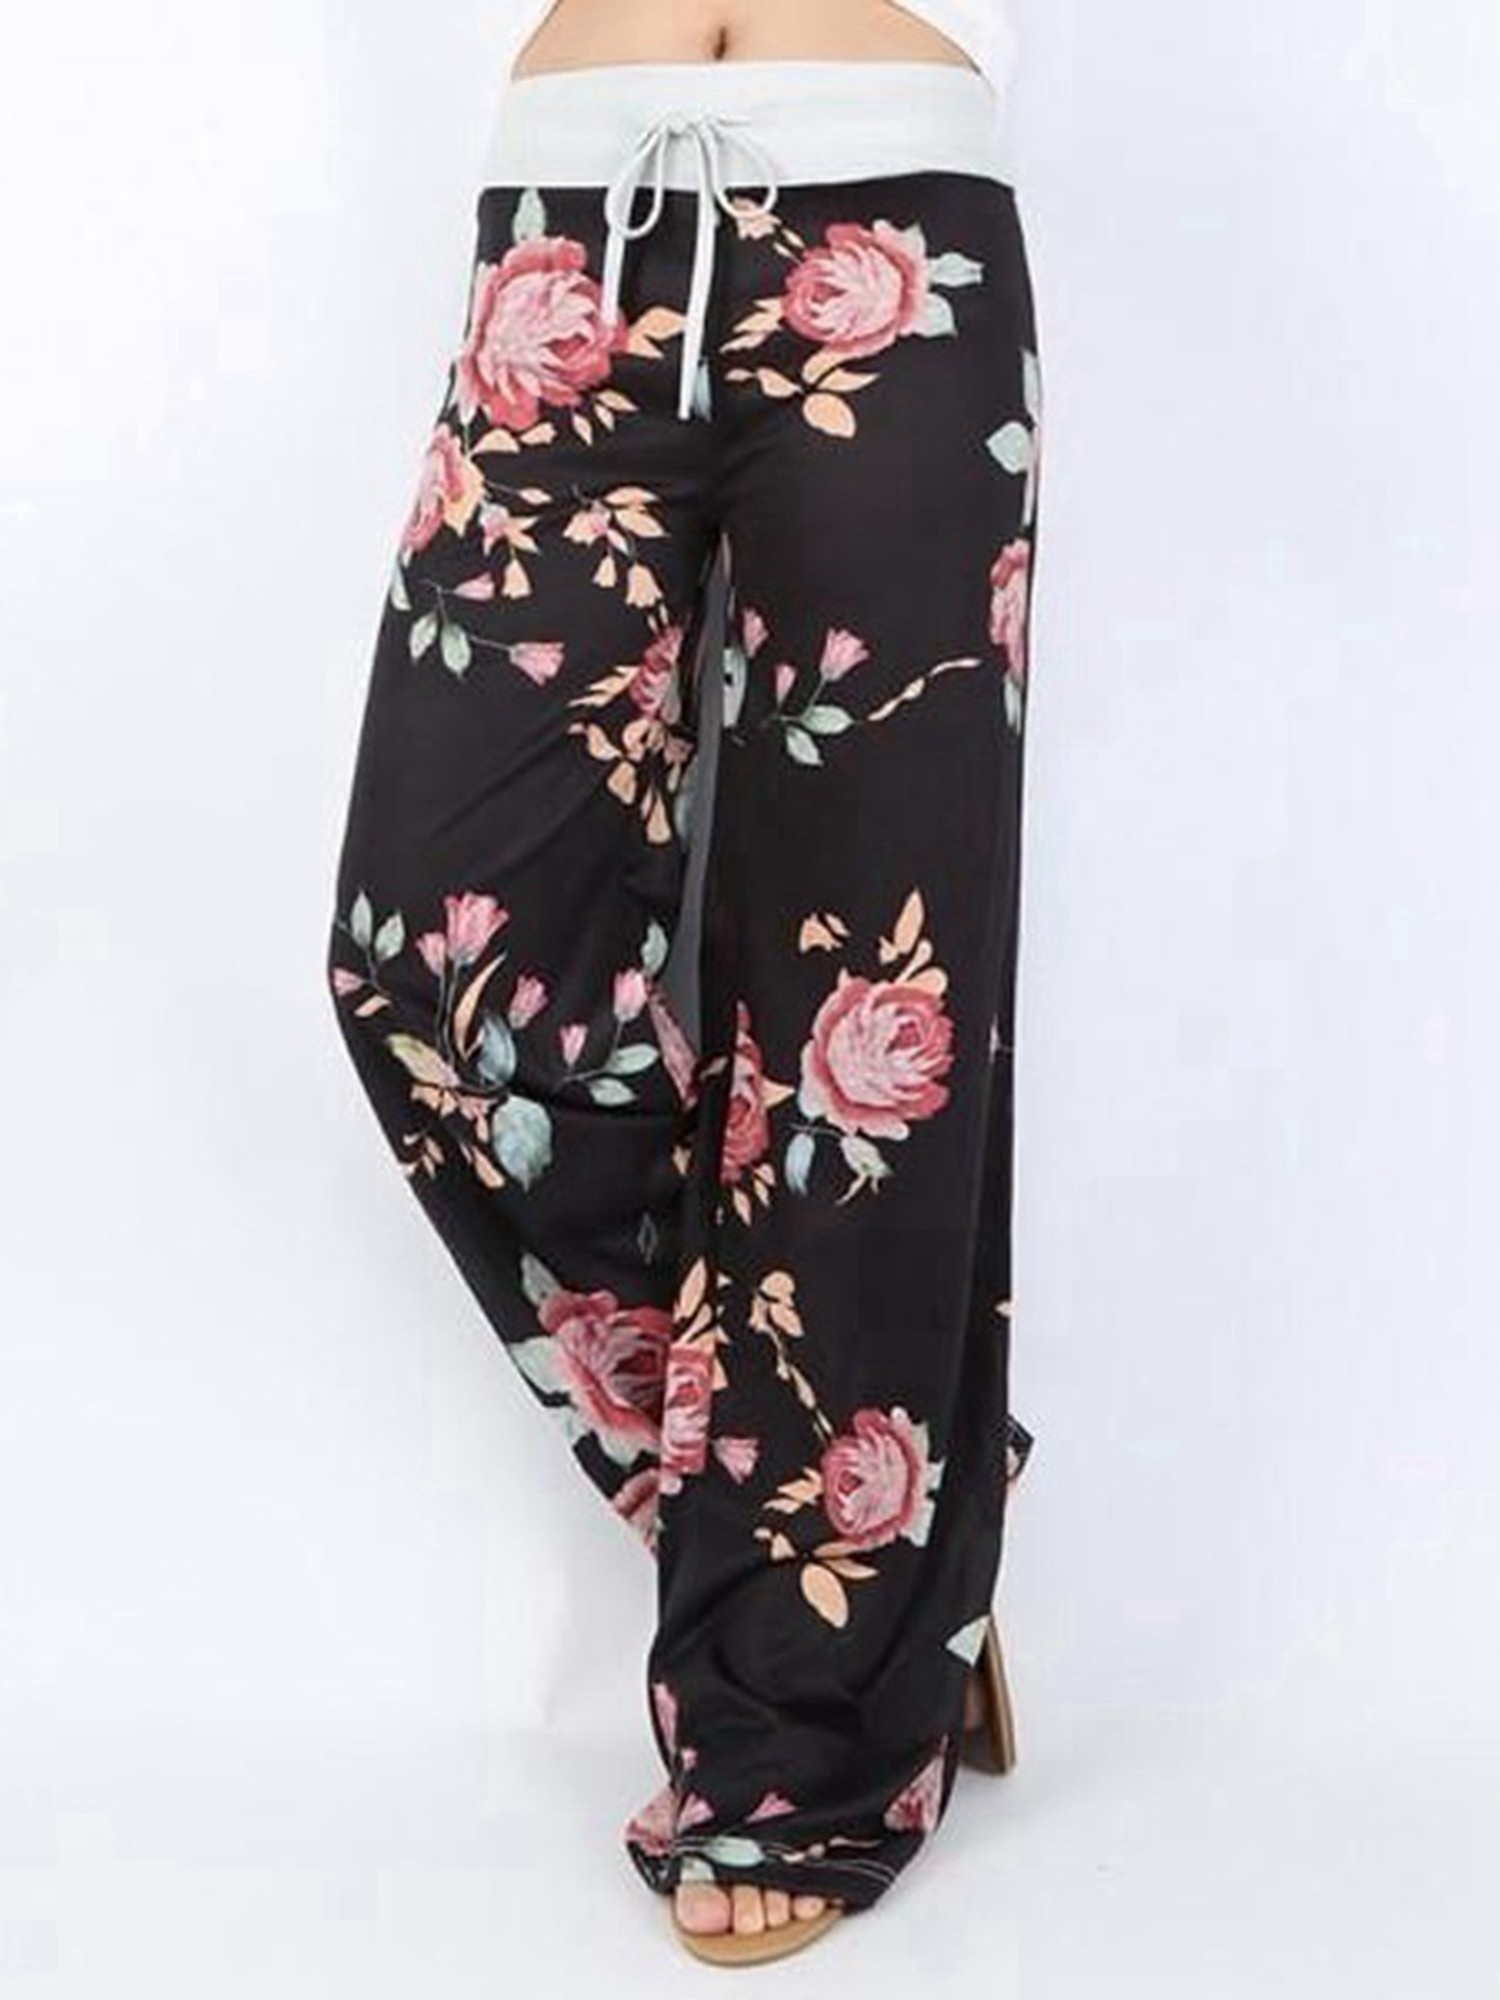 Casual Soft Pajama Pants for Women Floral Print Drawstring Casual